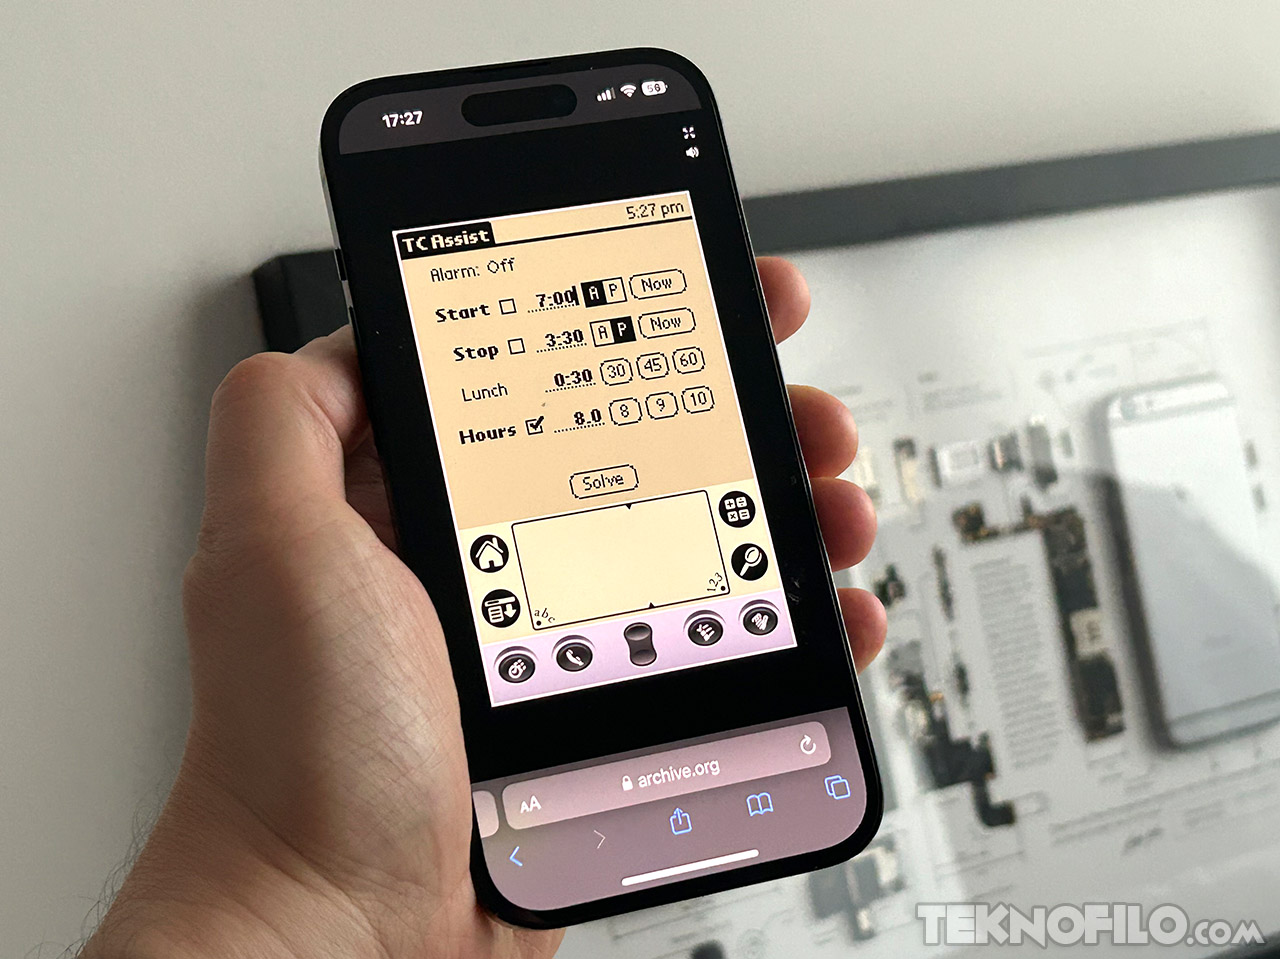  Remember the PalmPilot?  Now you can emulate hundreds of apps in your browser

